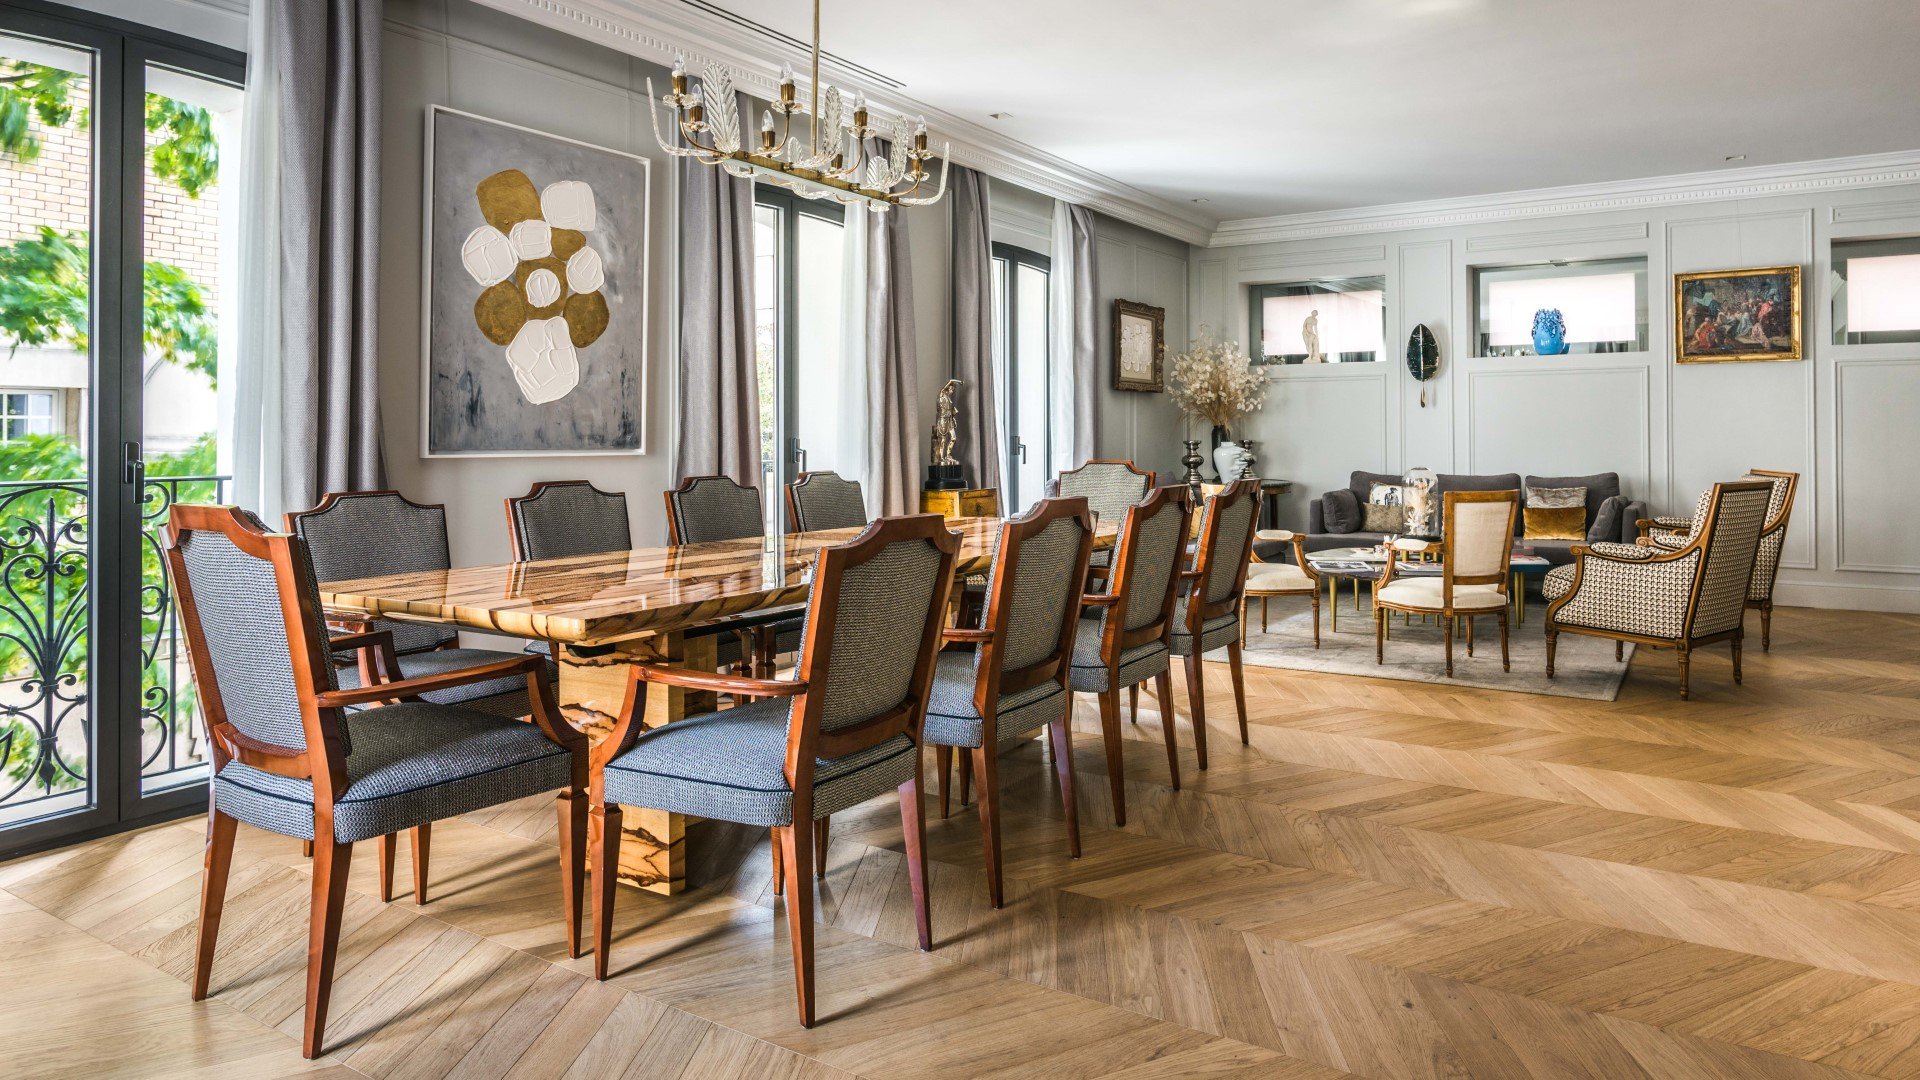 Dining room and living room of the luxury home Homanie Paris Mandel